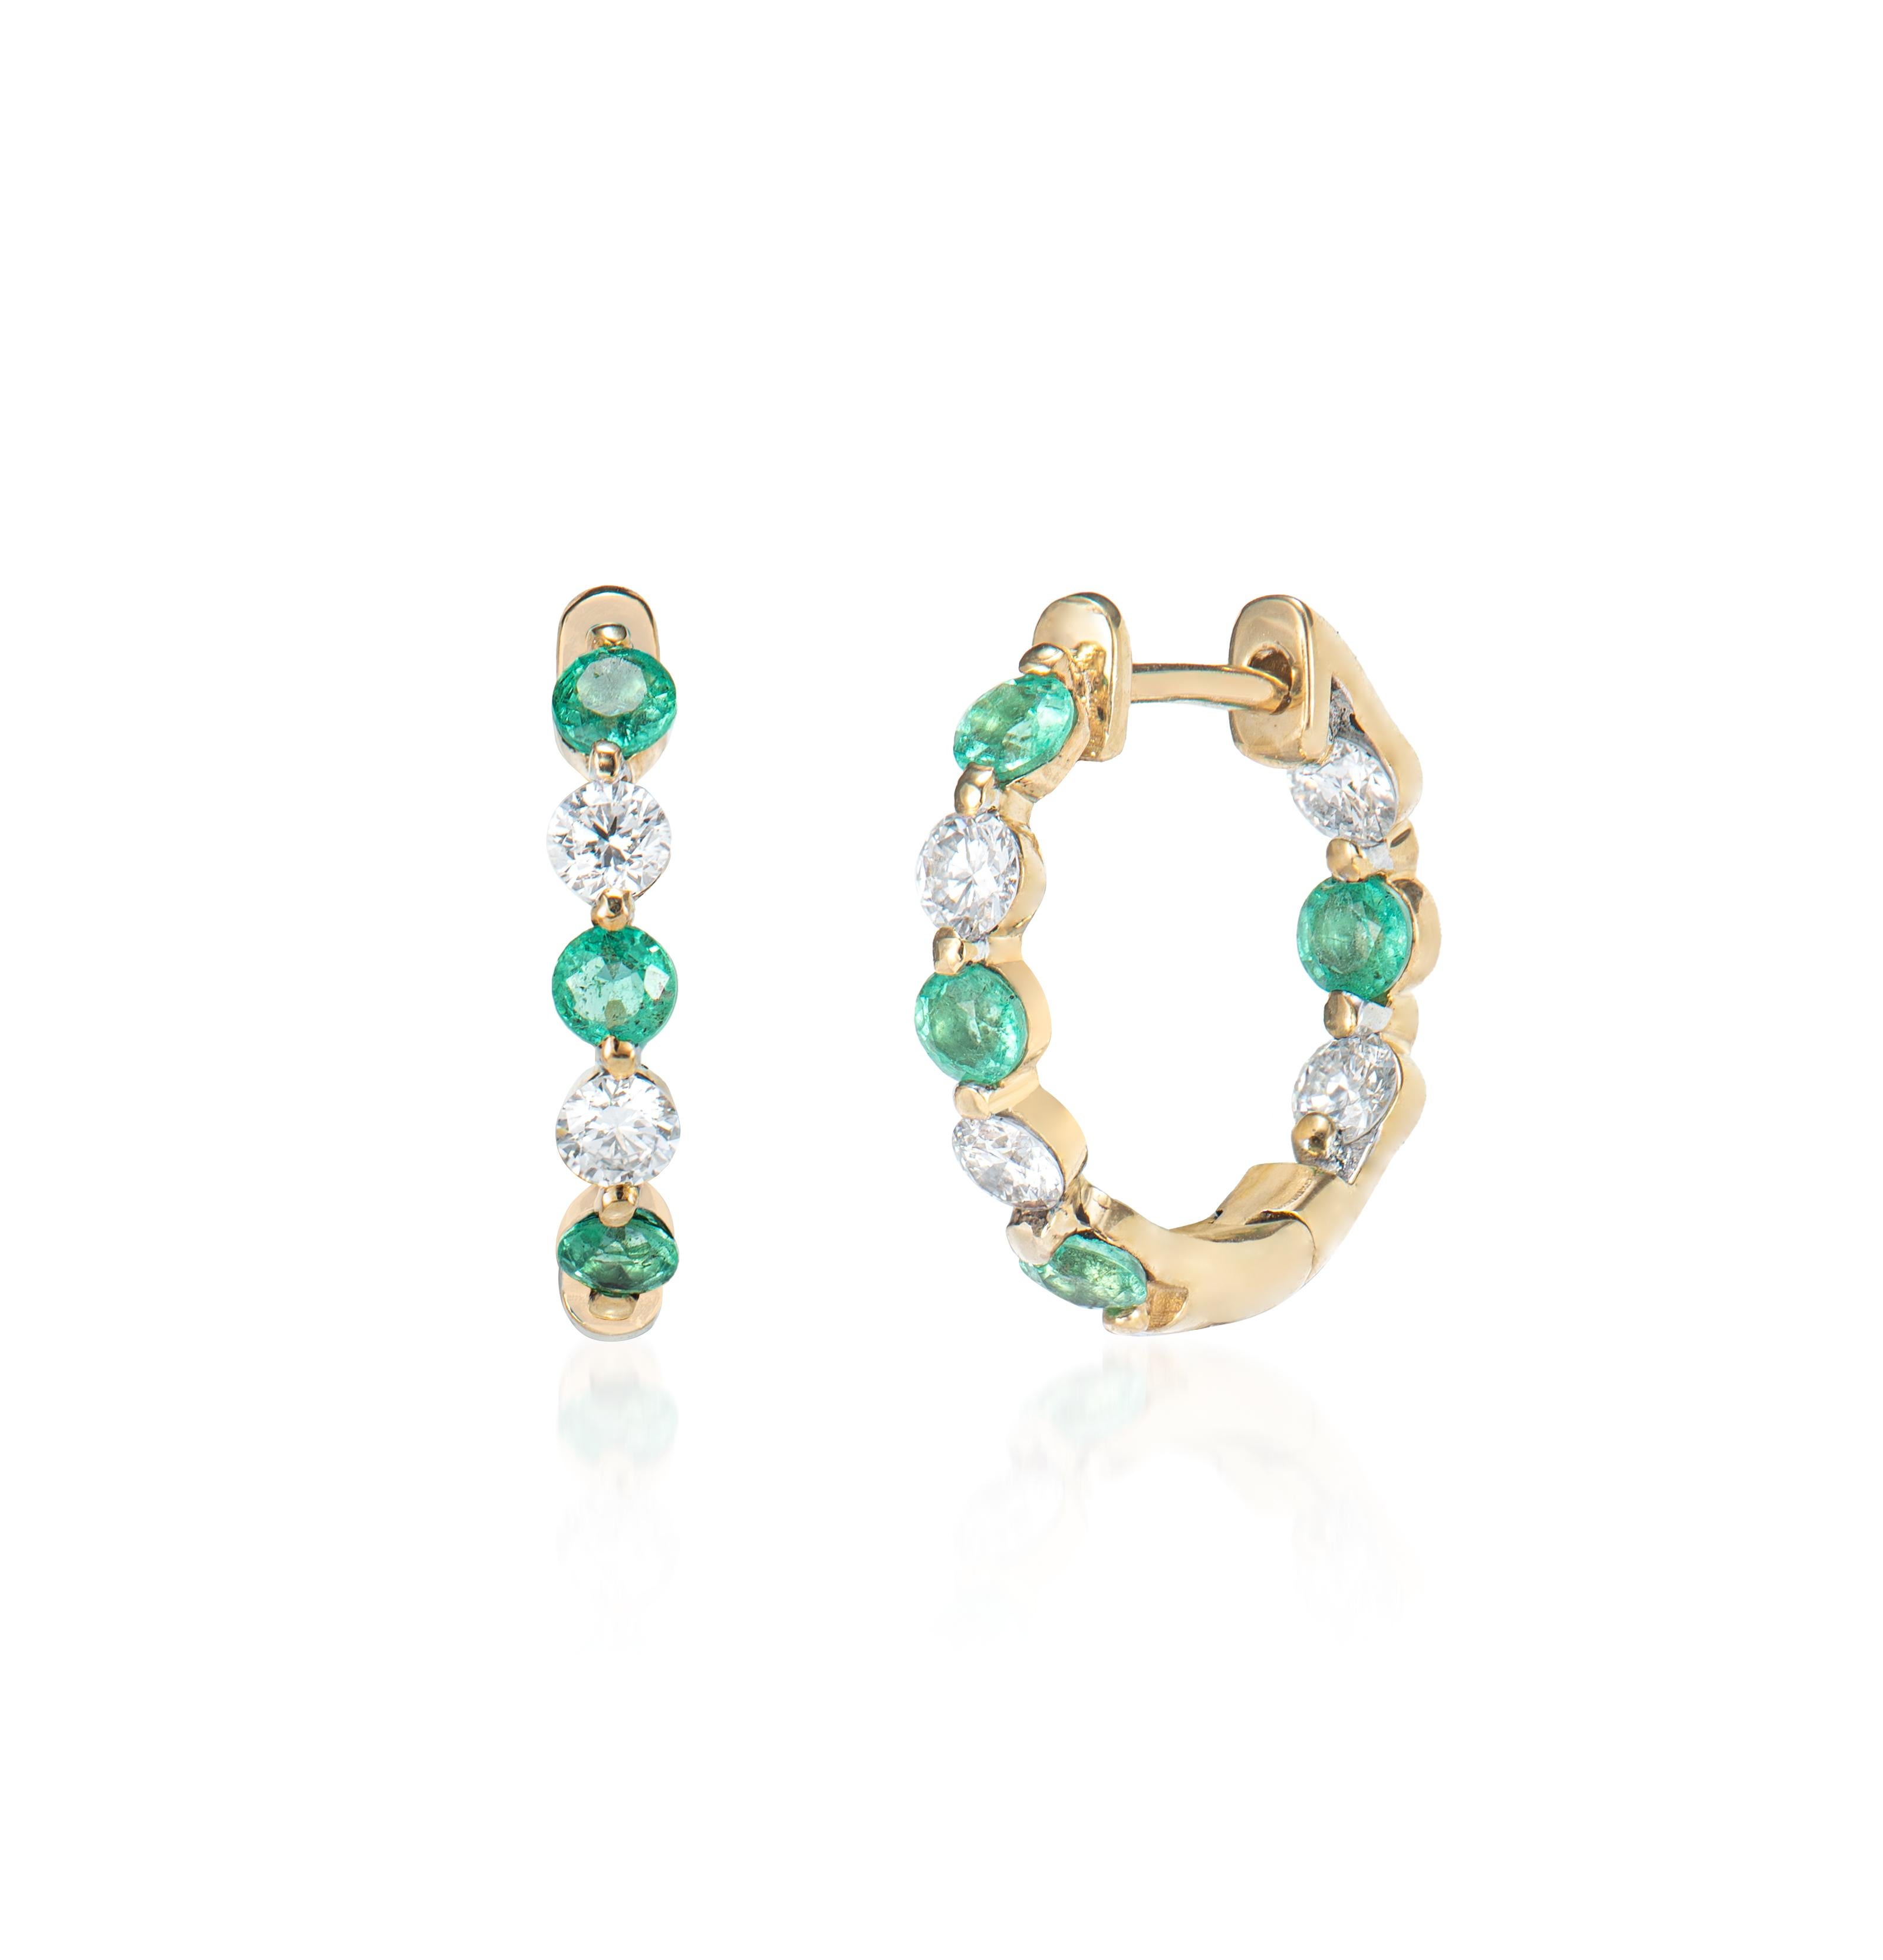 Round Cut 0.502 Carat Emerald Hoop Earrings in 14 Karat Yellow Gold with White Diamond For Sale